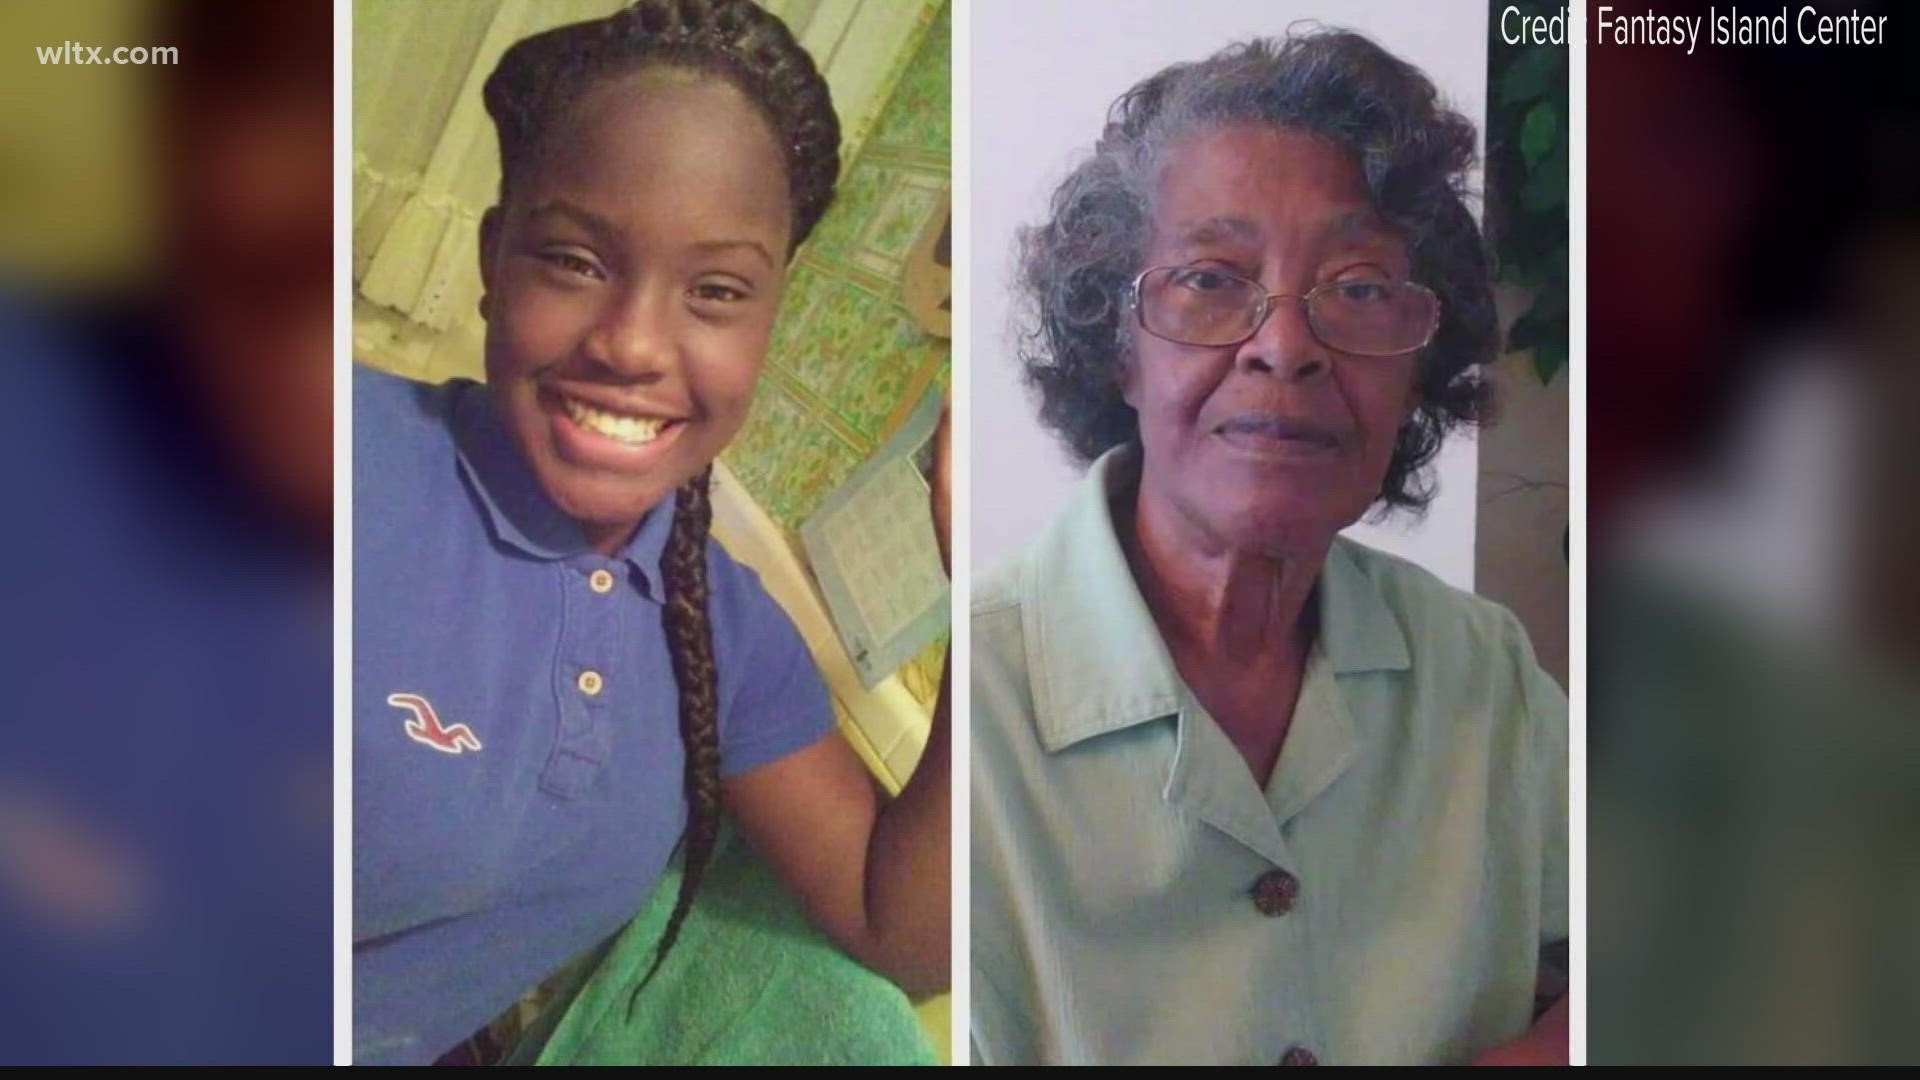 83-year-old, Jessie Brown and her 18-year-old granddaughter Shaneal Brown are remembered for their beautiful spirits, RIP.